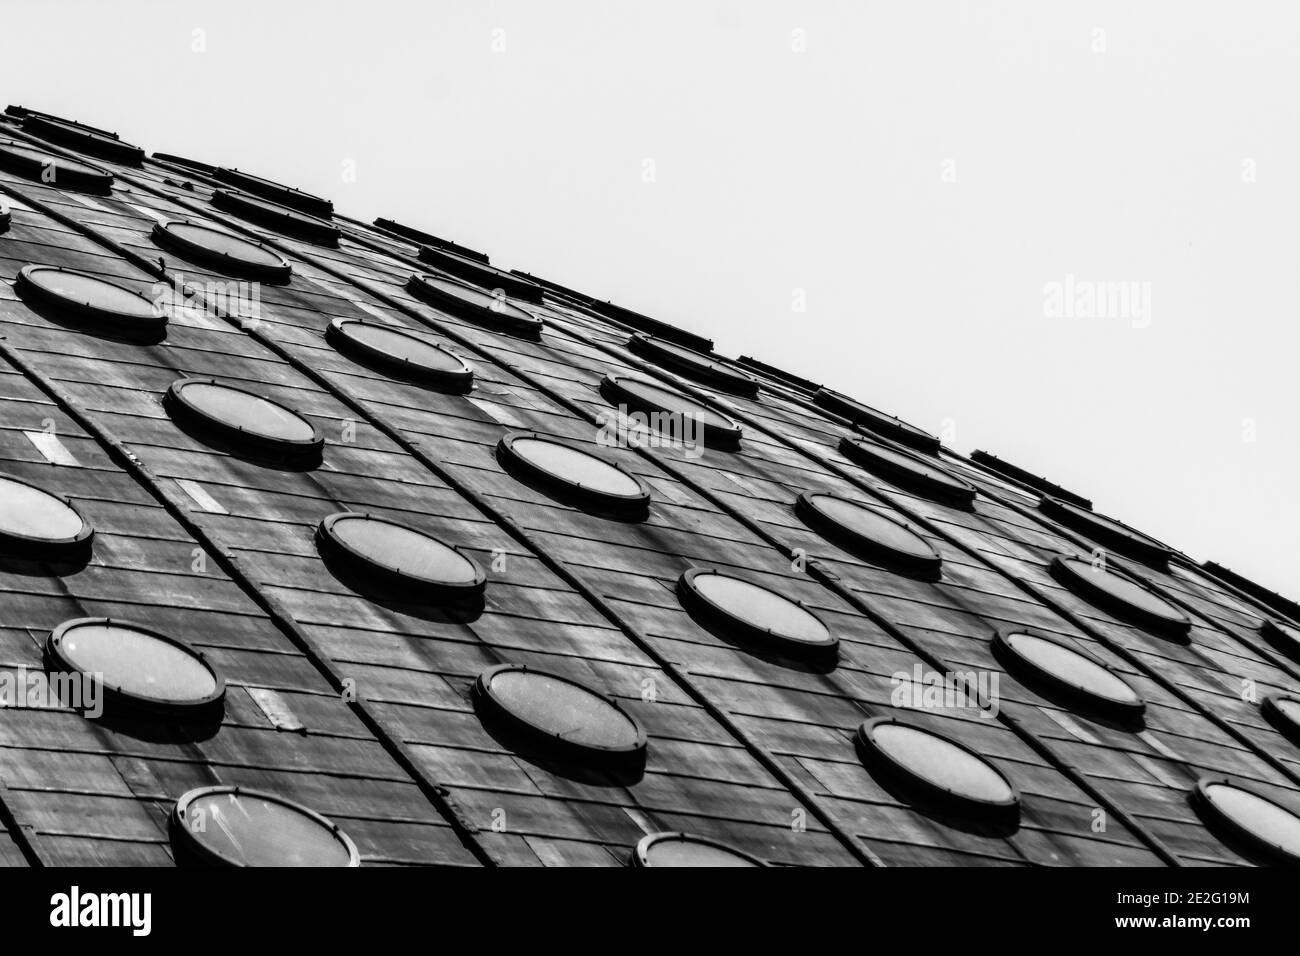 Closeup grayscale of a roof of a house with many round windows Stock Photo